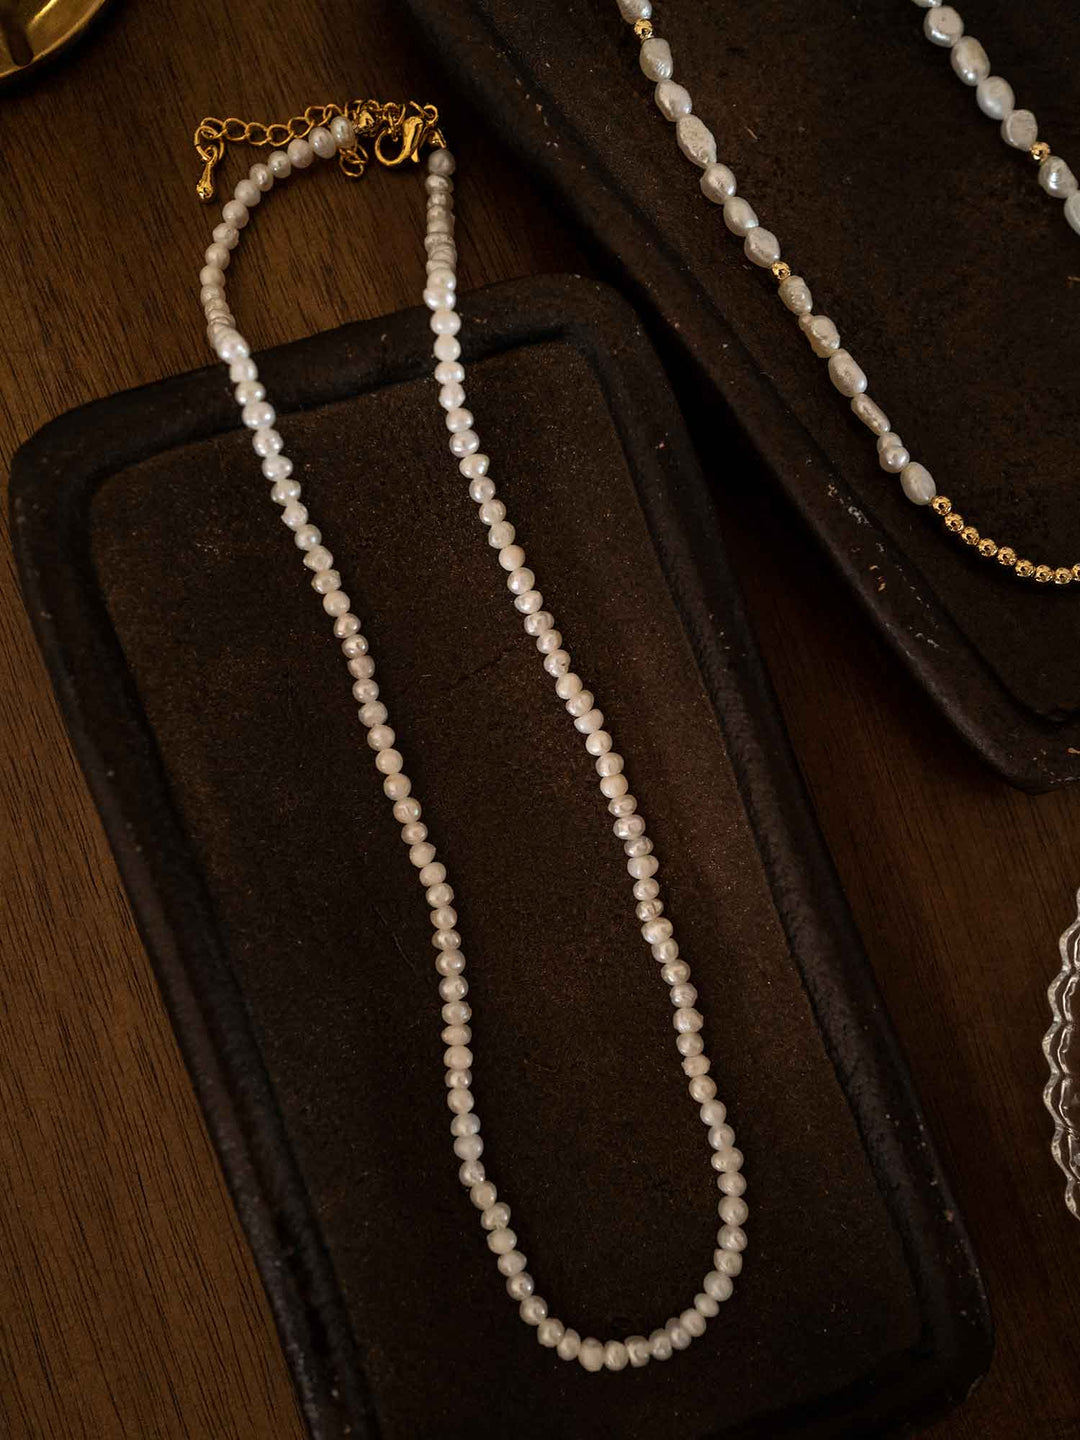 A simple cultured pearl necklace